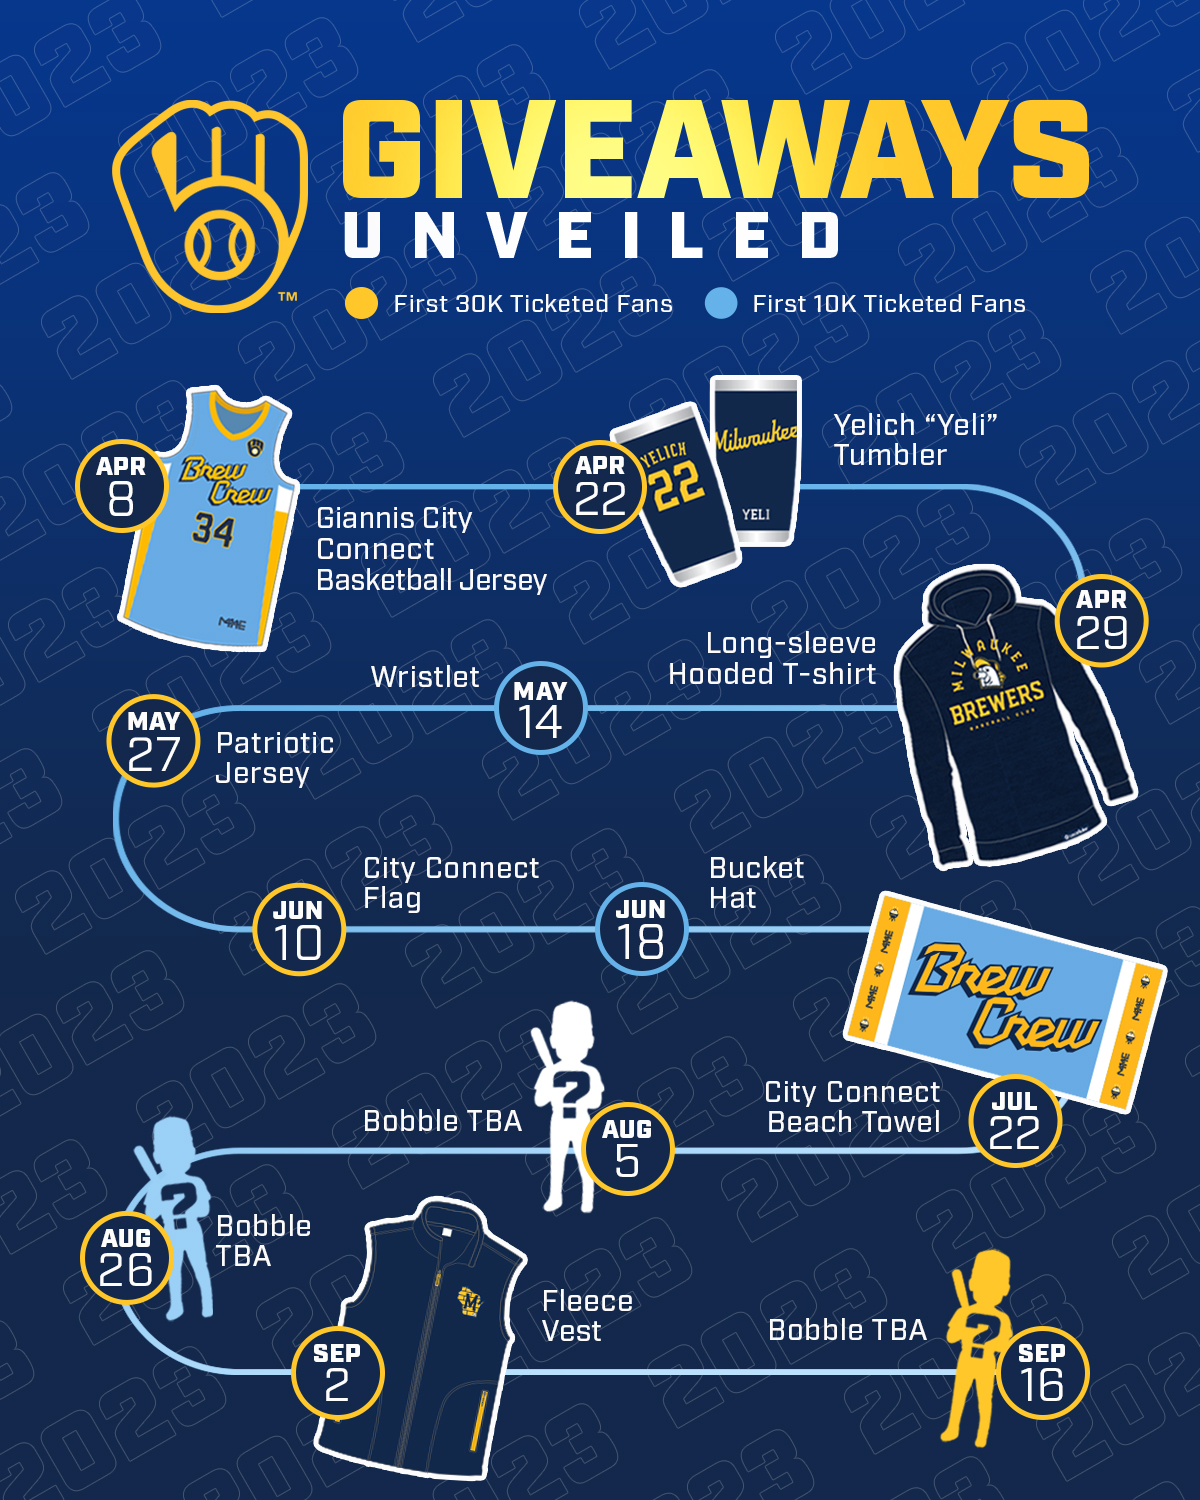 city connect brewers jersey